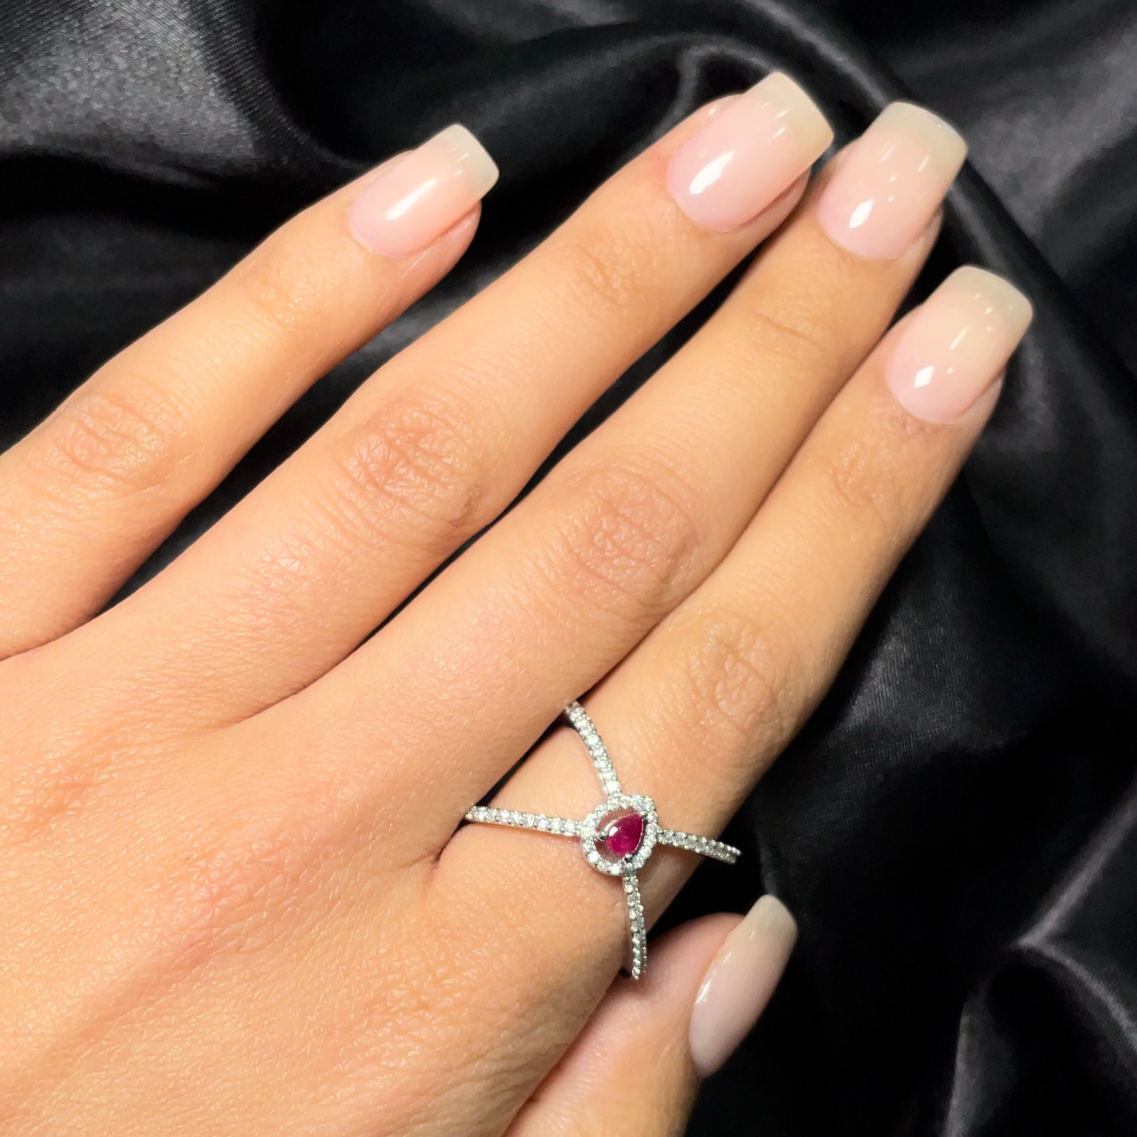 18ct Rose Gold Diamond Ring with a Four Bar Crossover and Ruby Centered